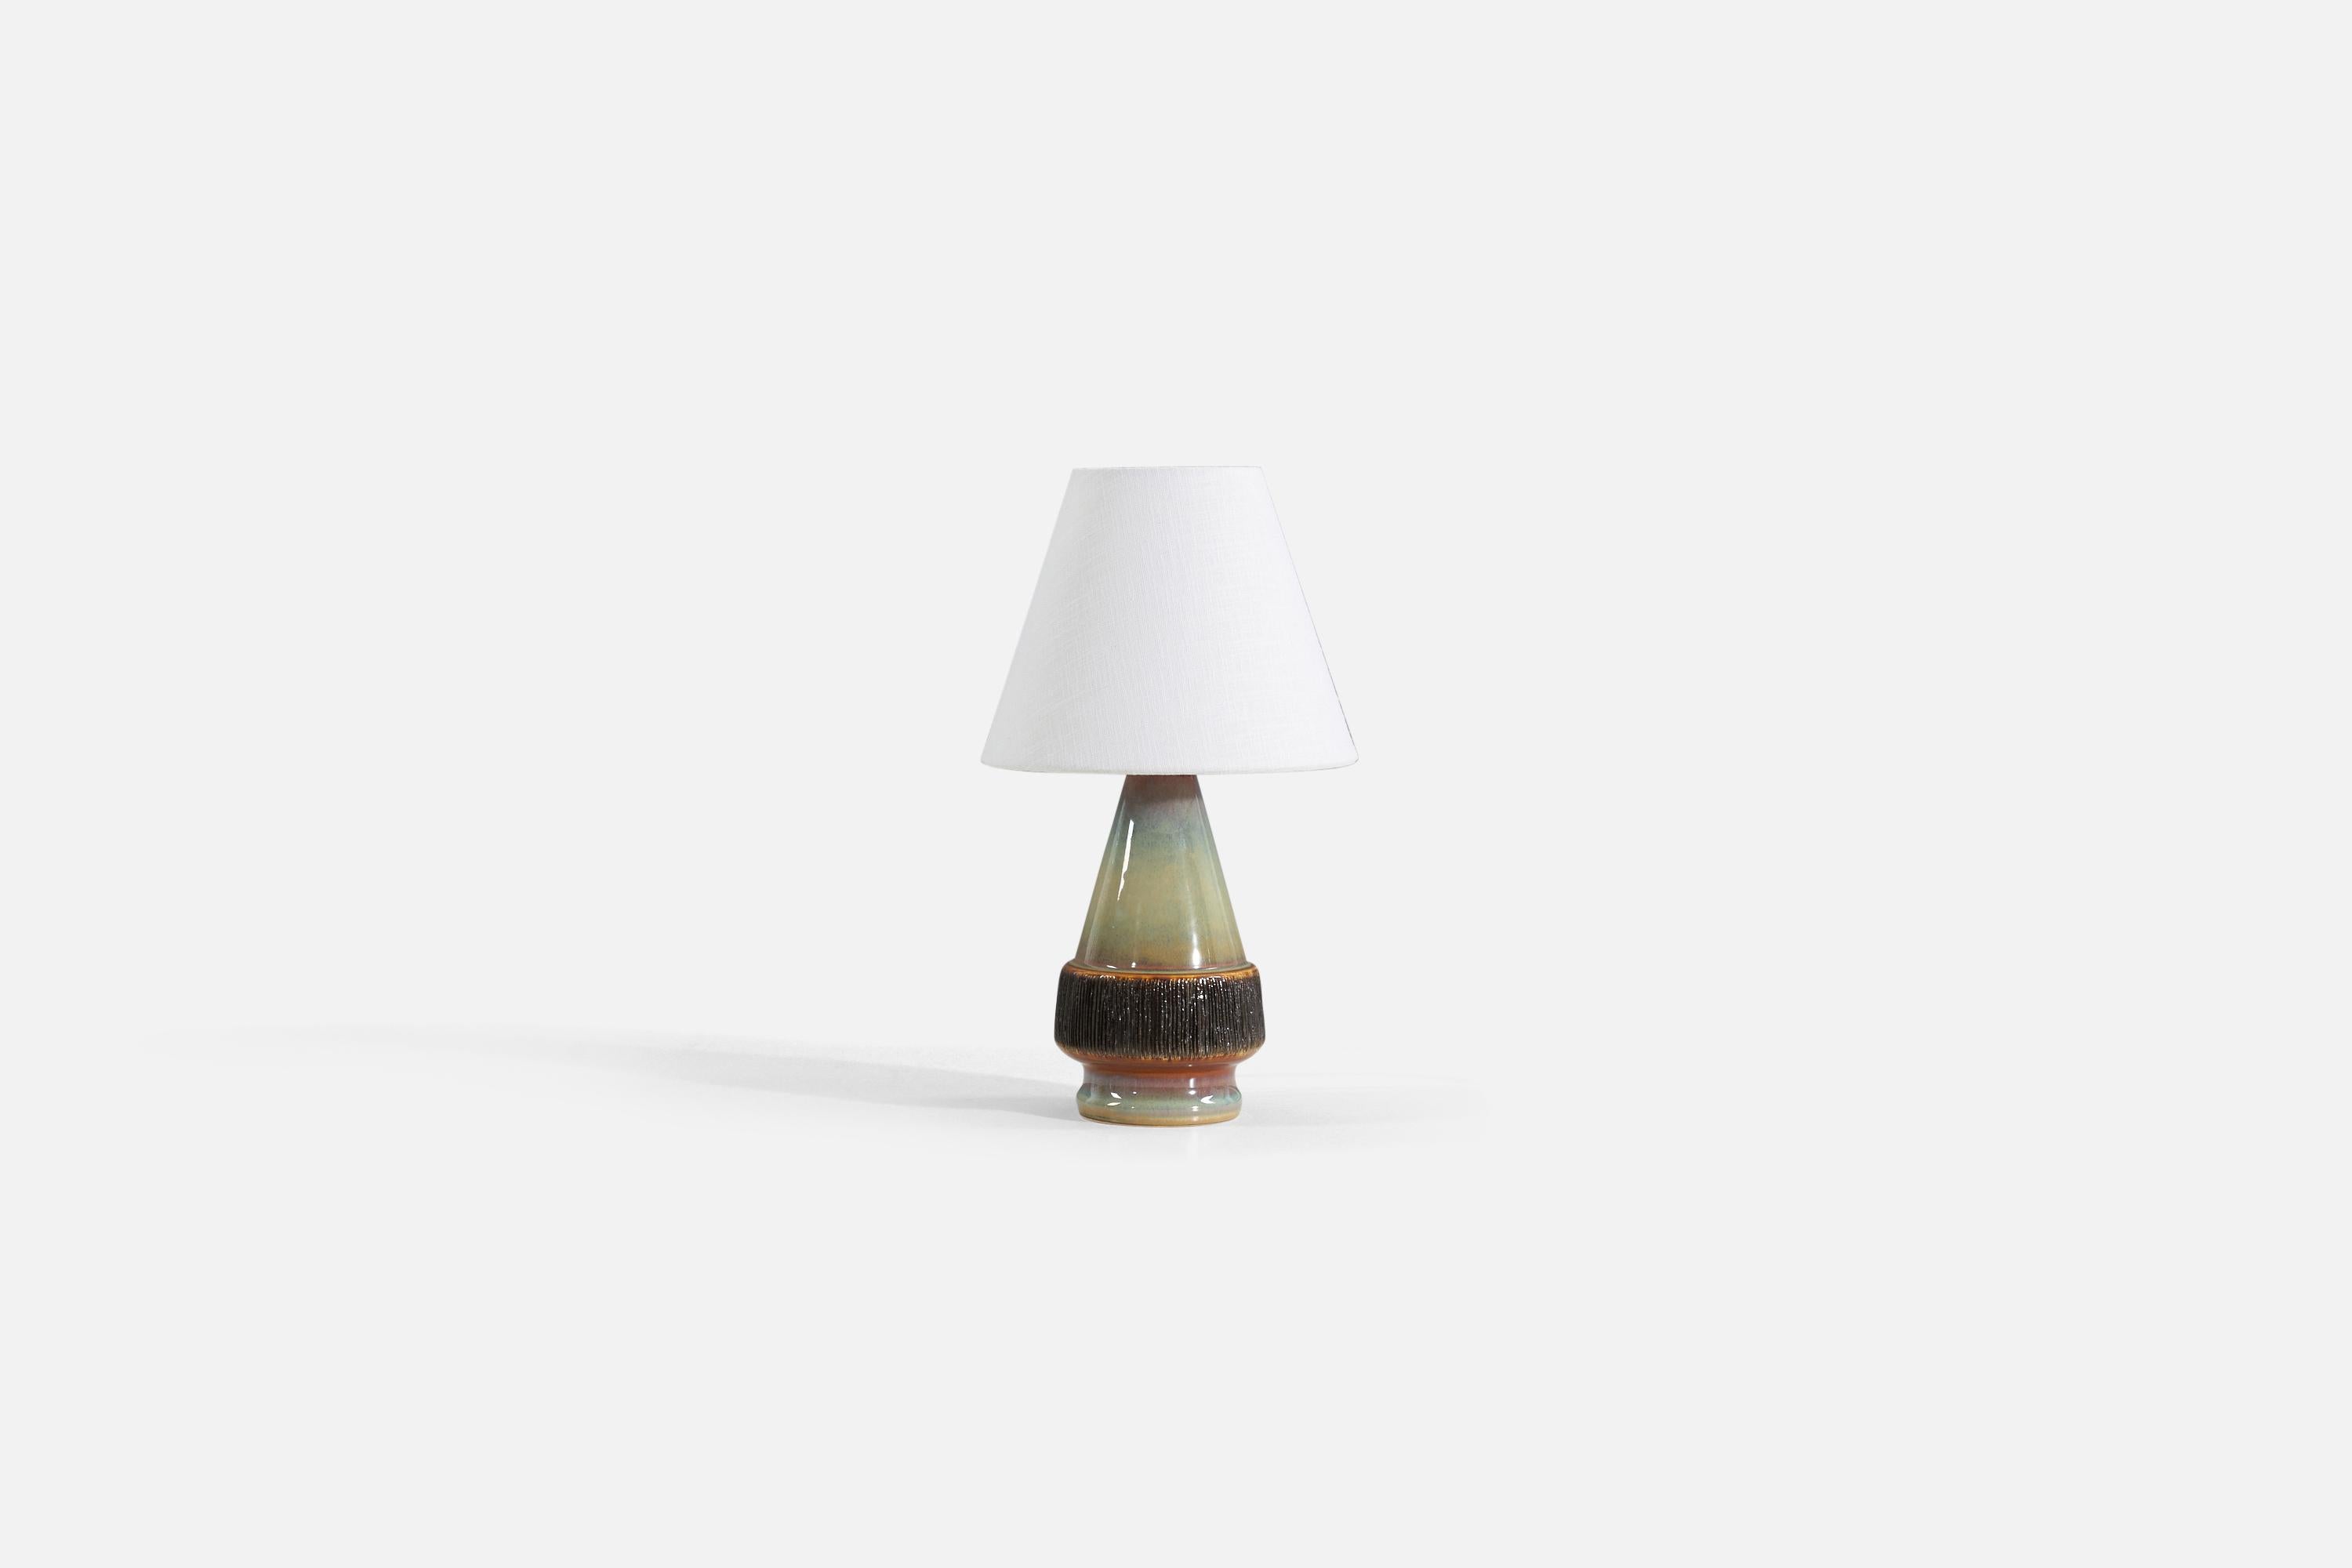 A glazed stoneware table lamp, produced by Søholm Stentøj, Denmark, 1960s.

Sold without lampshade. 

Measurements listed are of lamp.
Shade : 4 x 8 x 6.5
Lamp with shade : 14.25 x 8 x 8.